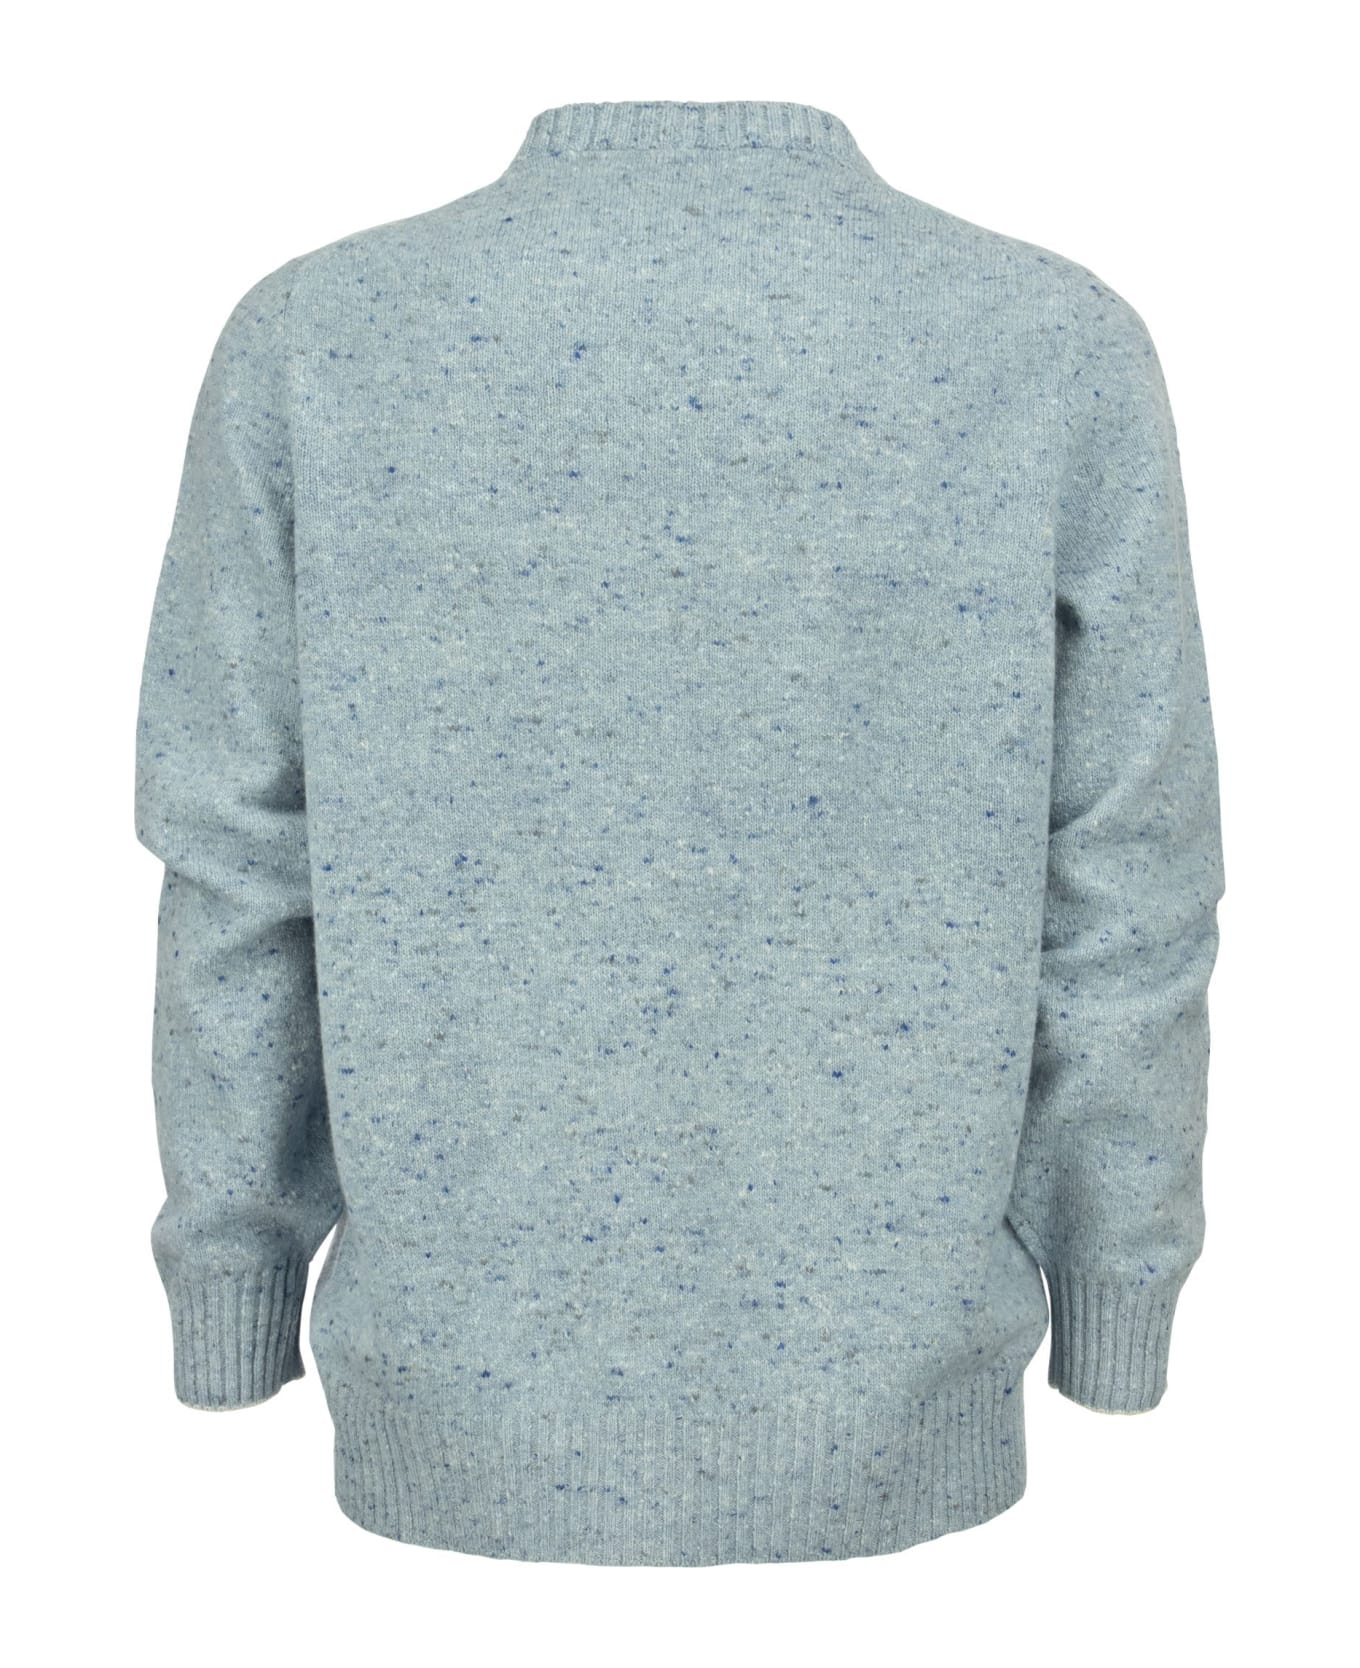 Brunello Cucinelli Crew-neck Sweater In Wool And Cashmere Mix - Light Blue ニットウェア